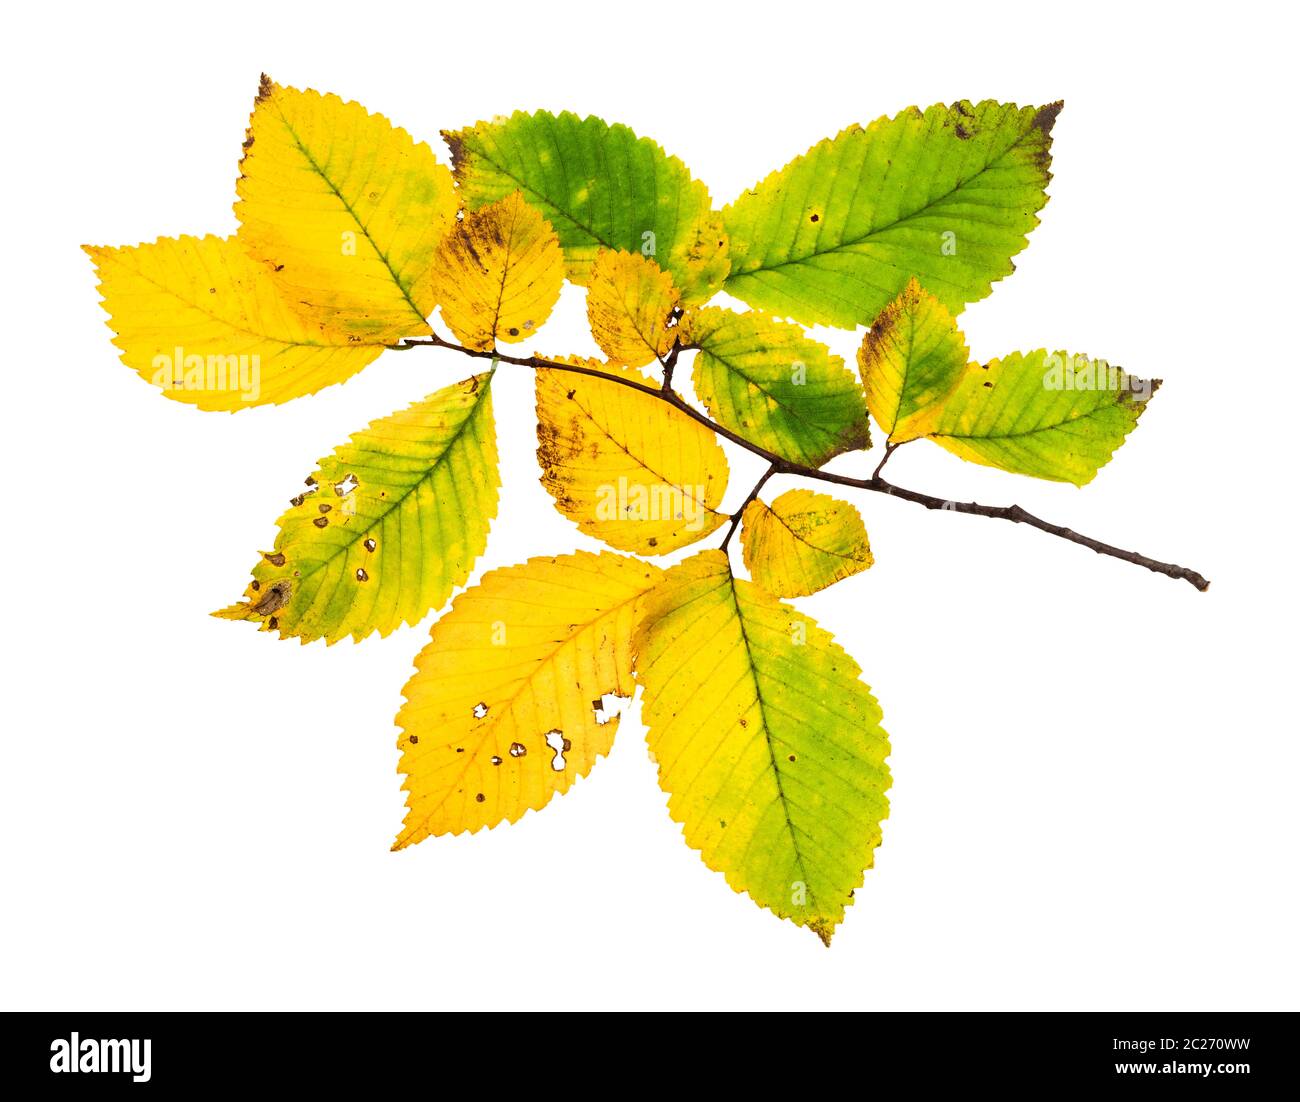 branch with yellowing leaves of elm tree in autumn isolated on white background Stock Photo